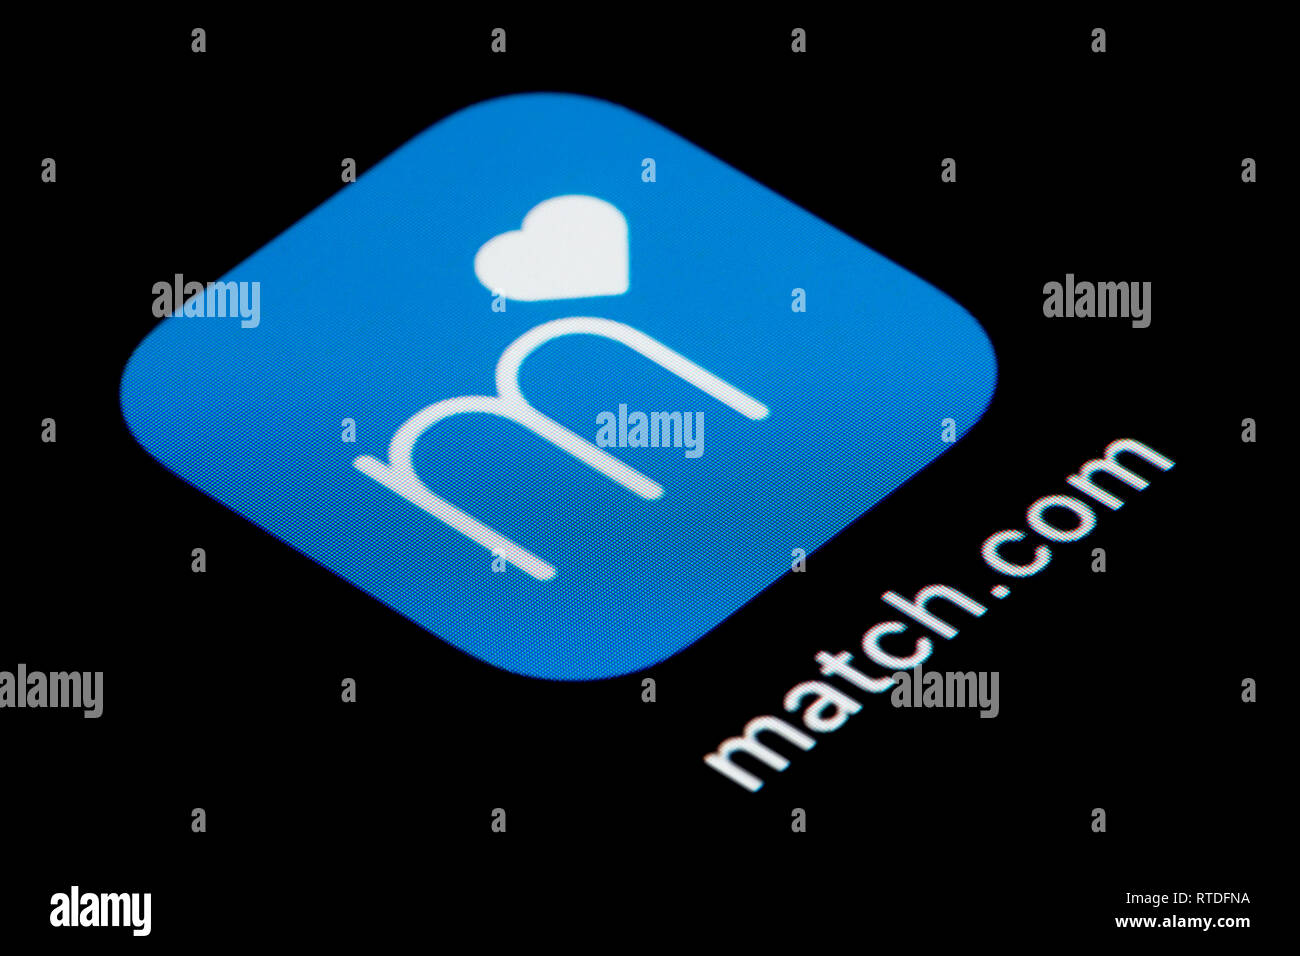 A close-up shot of the Match.com app icon, as seen on the screen of a smart phone (Editorial use only) Stock Photo